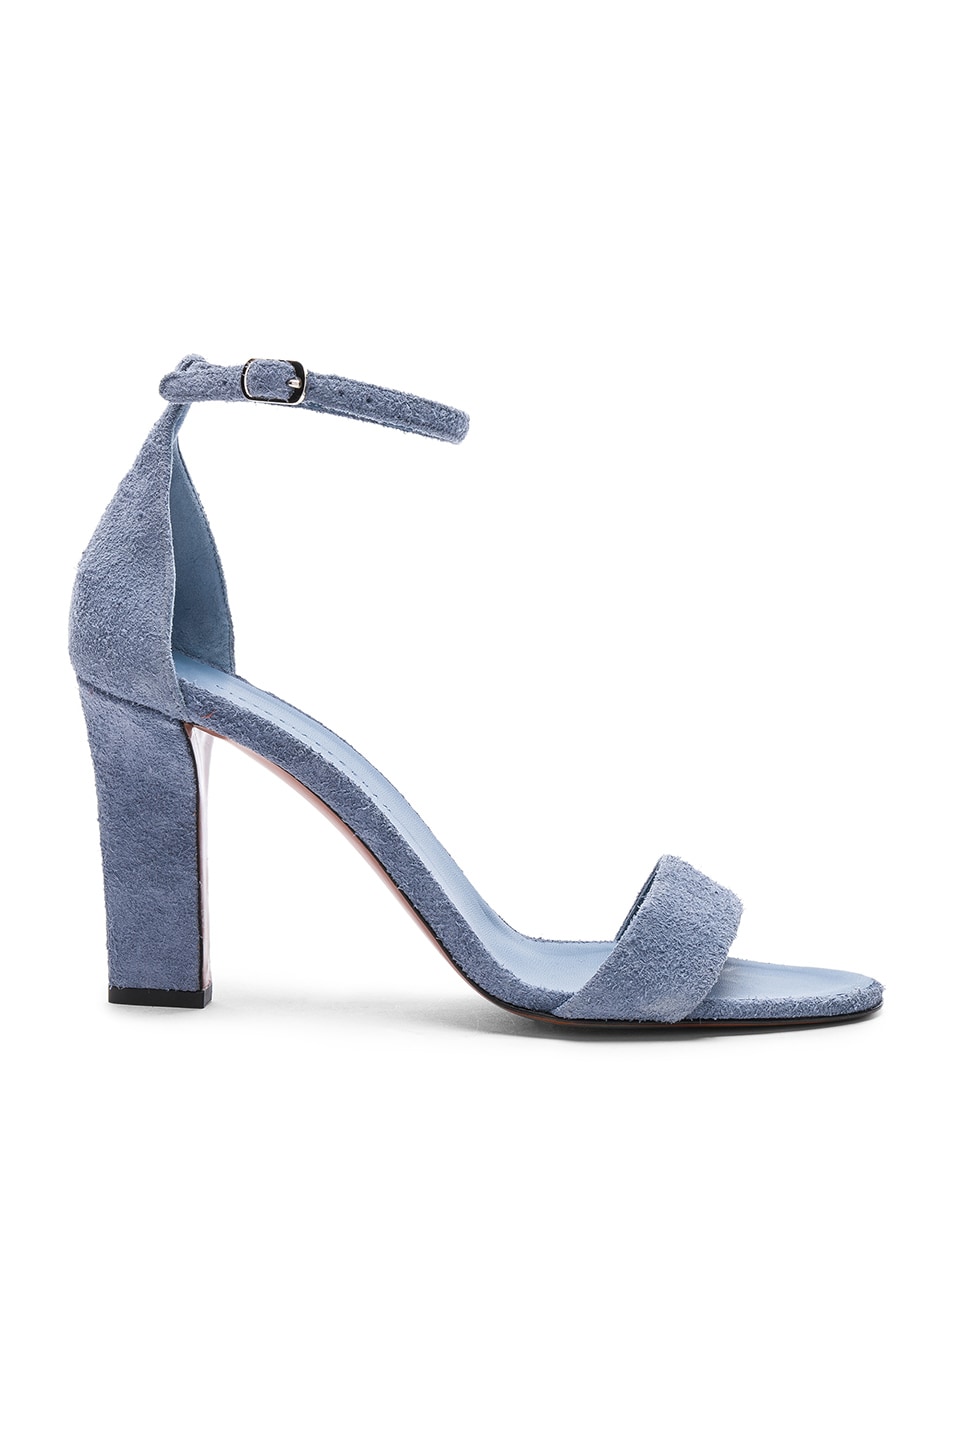 Image 1 of Victoria Beckham Suede Anna Ankle Strap Sandals in Baby Blue